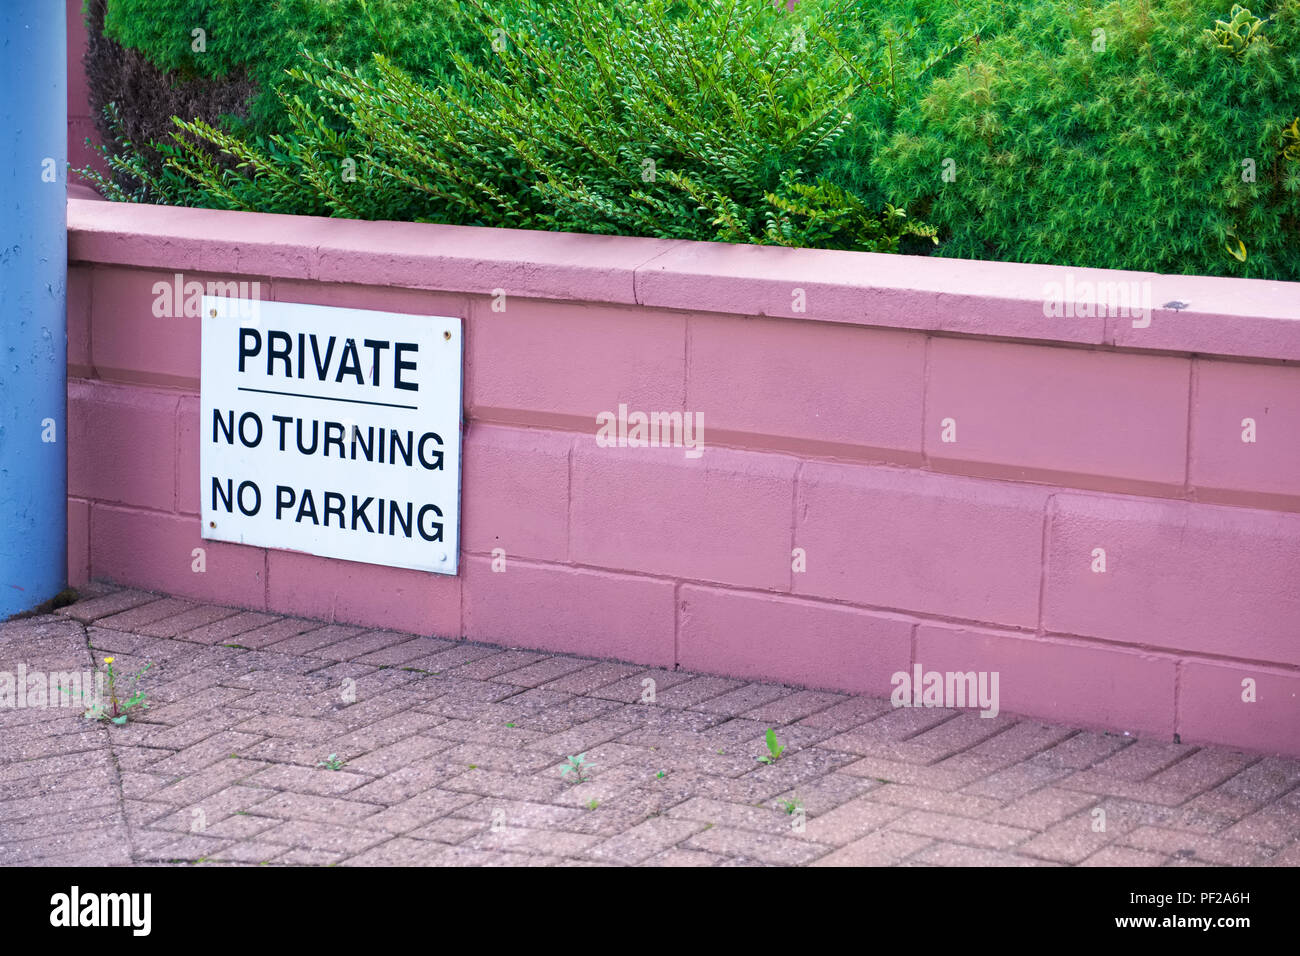 No turning or parking on private drive sign Stock Photo